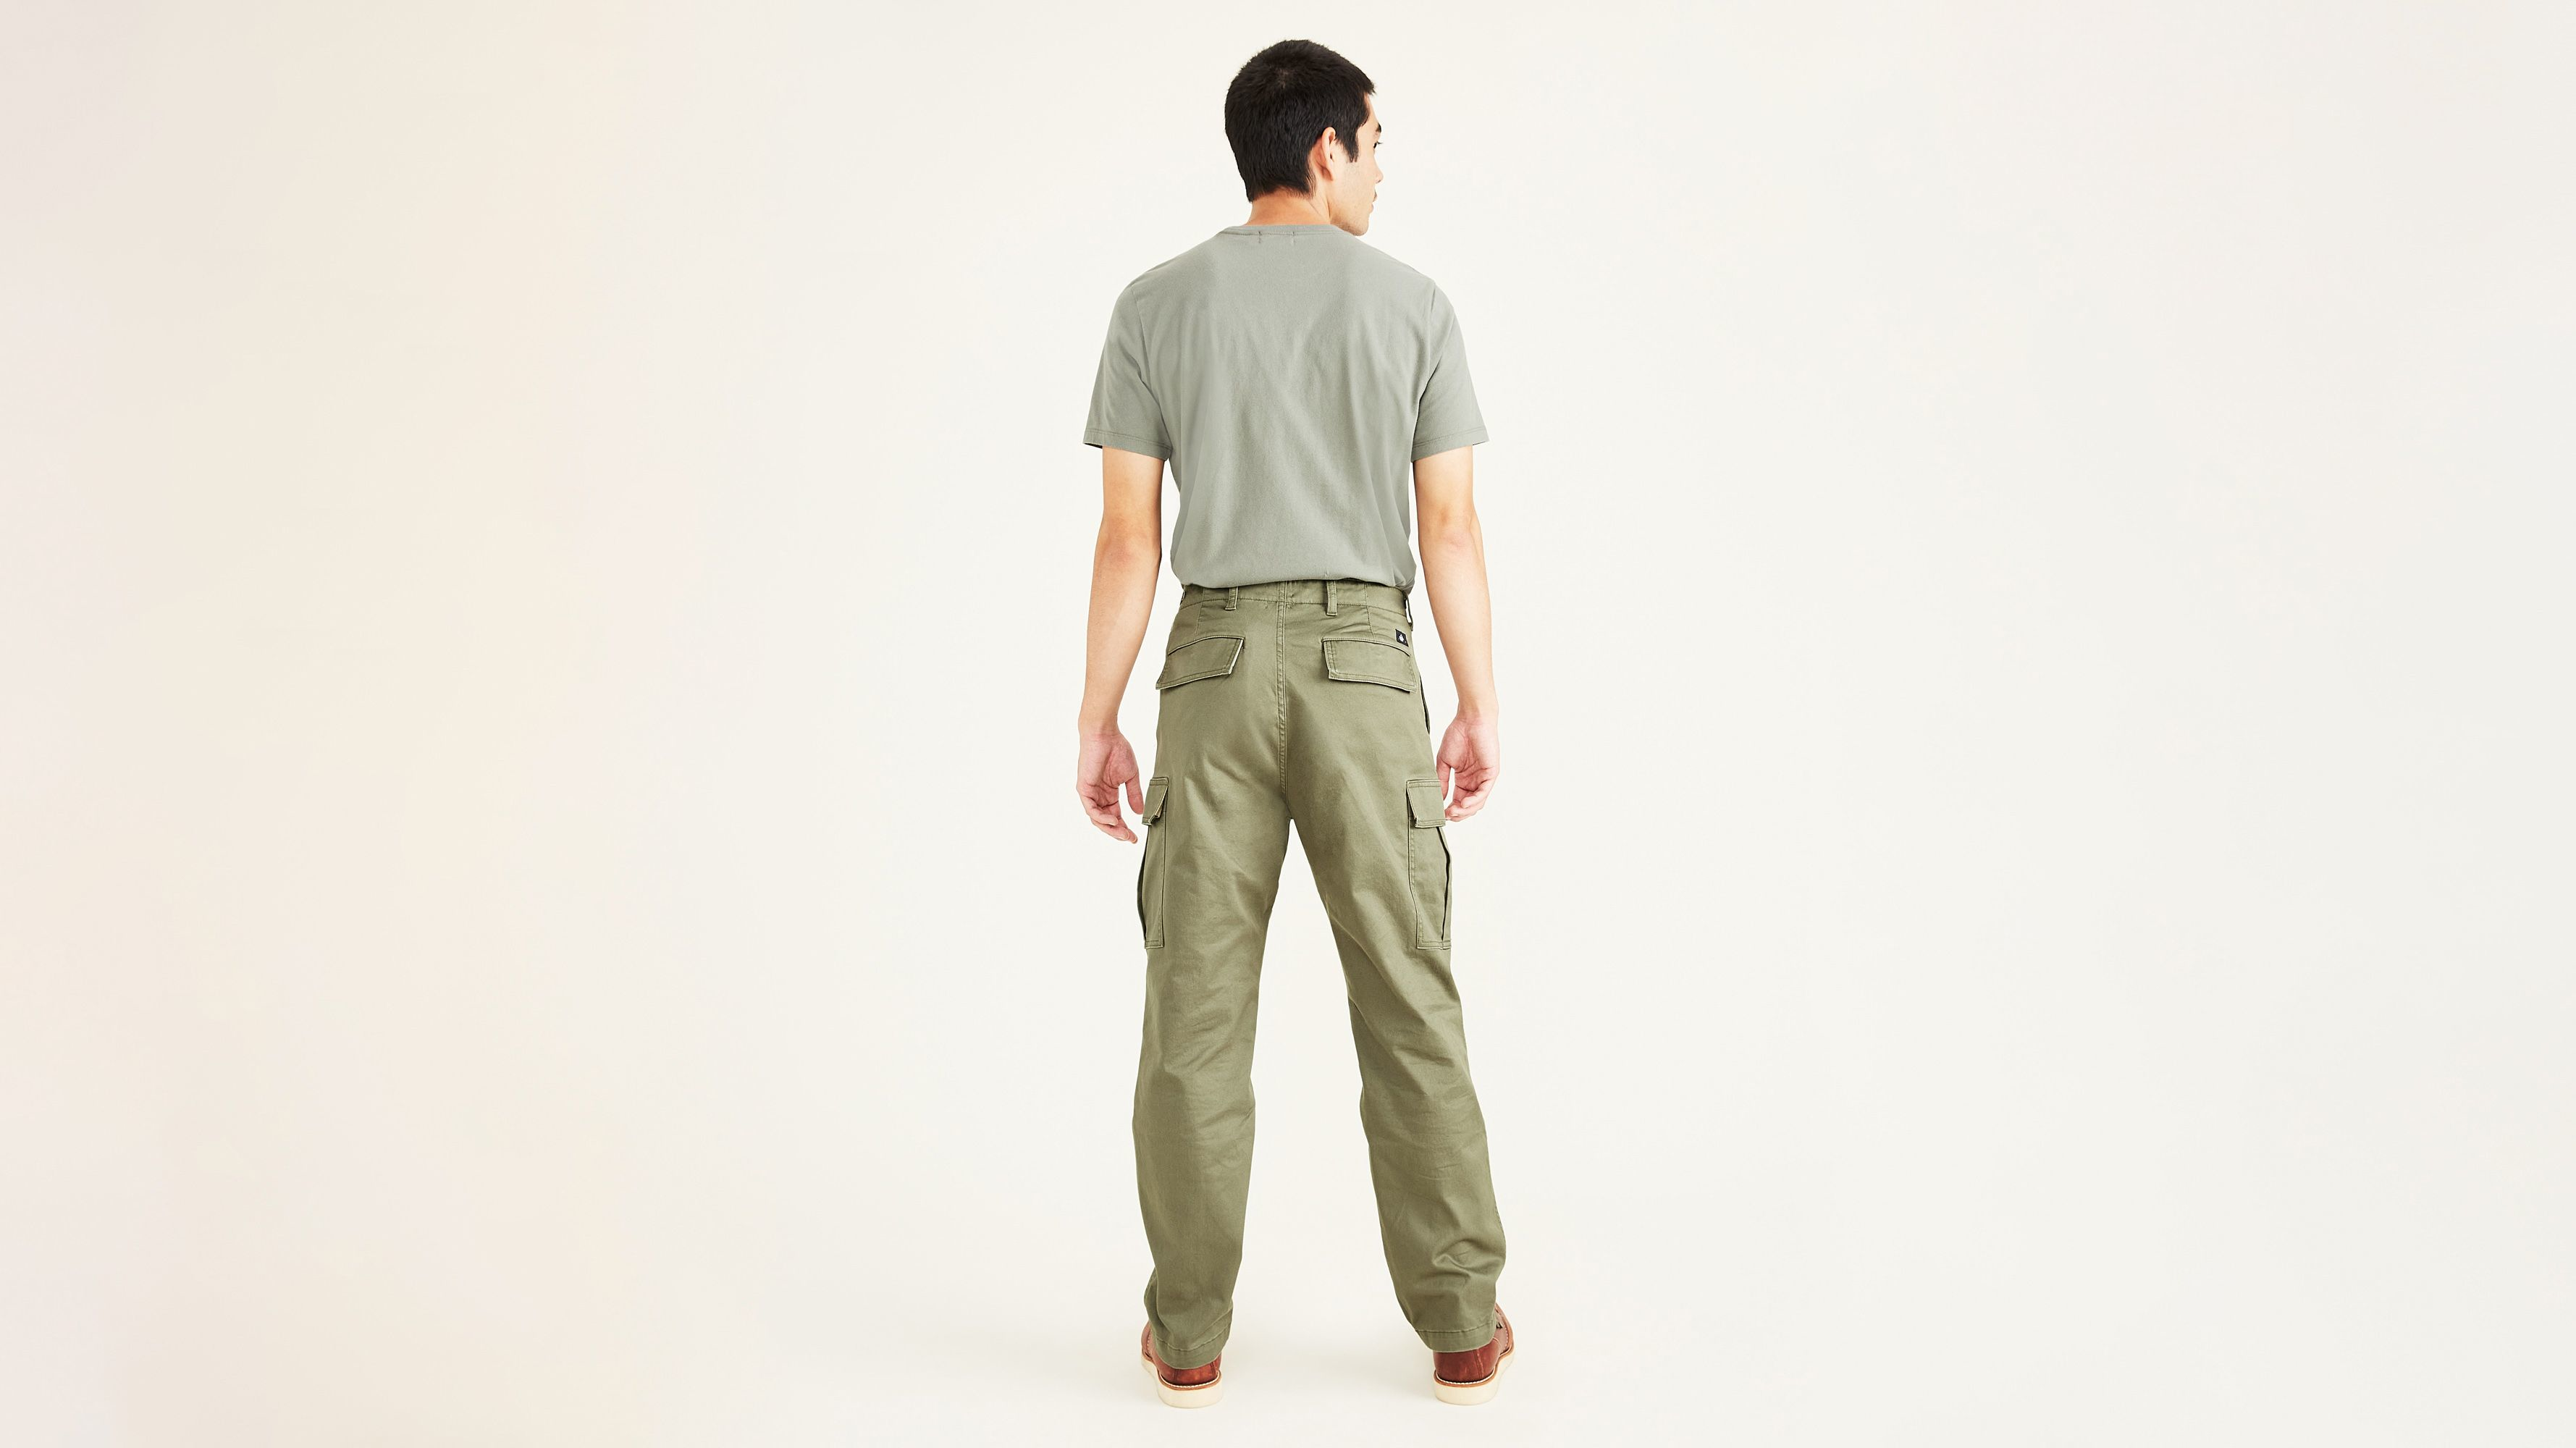 6 pocket pants cargo - Buy 6 pocket pants cargo with free shipping